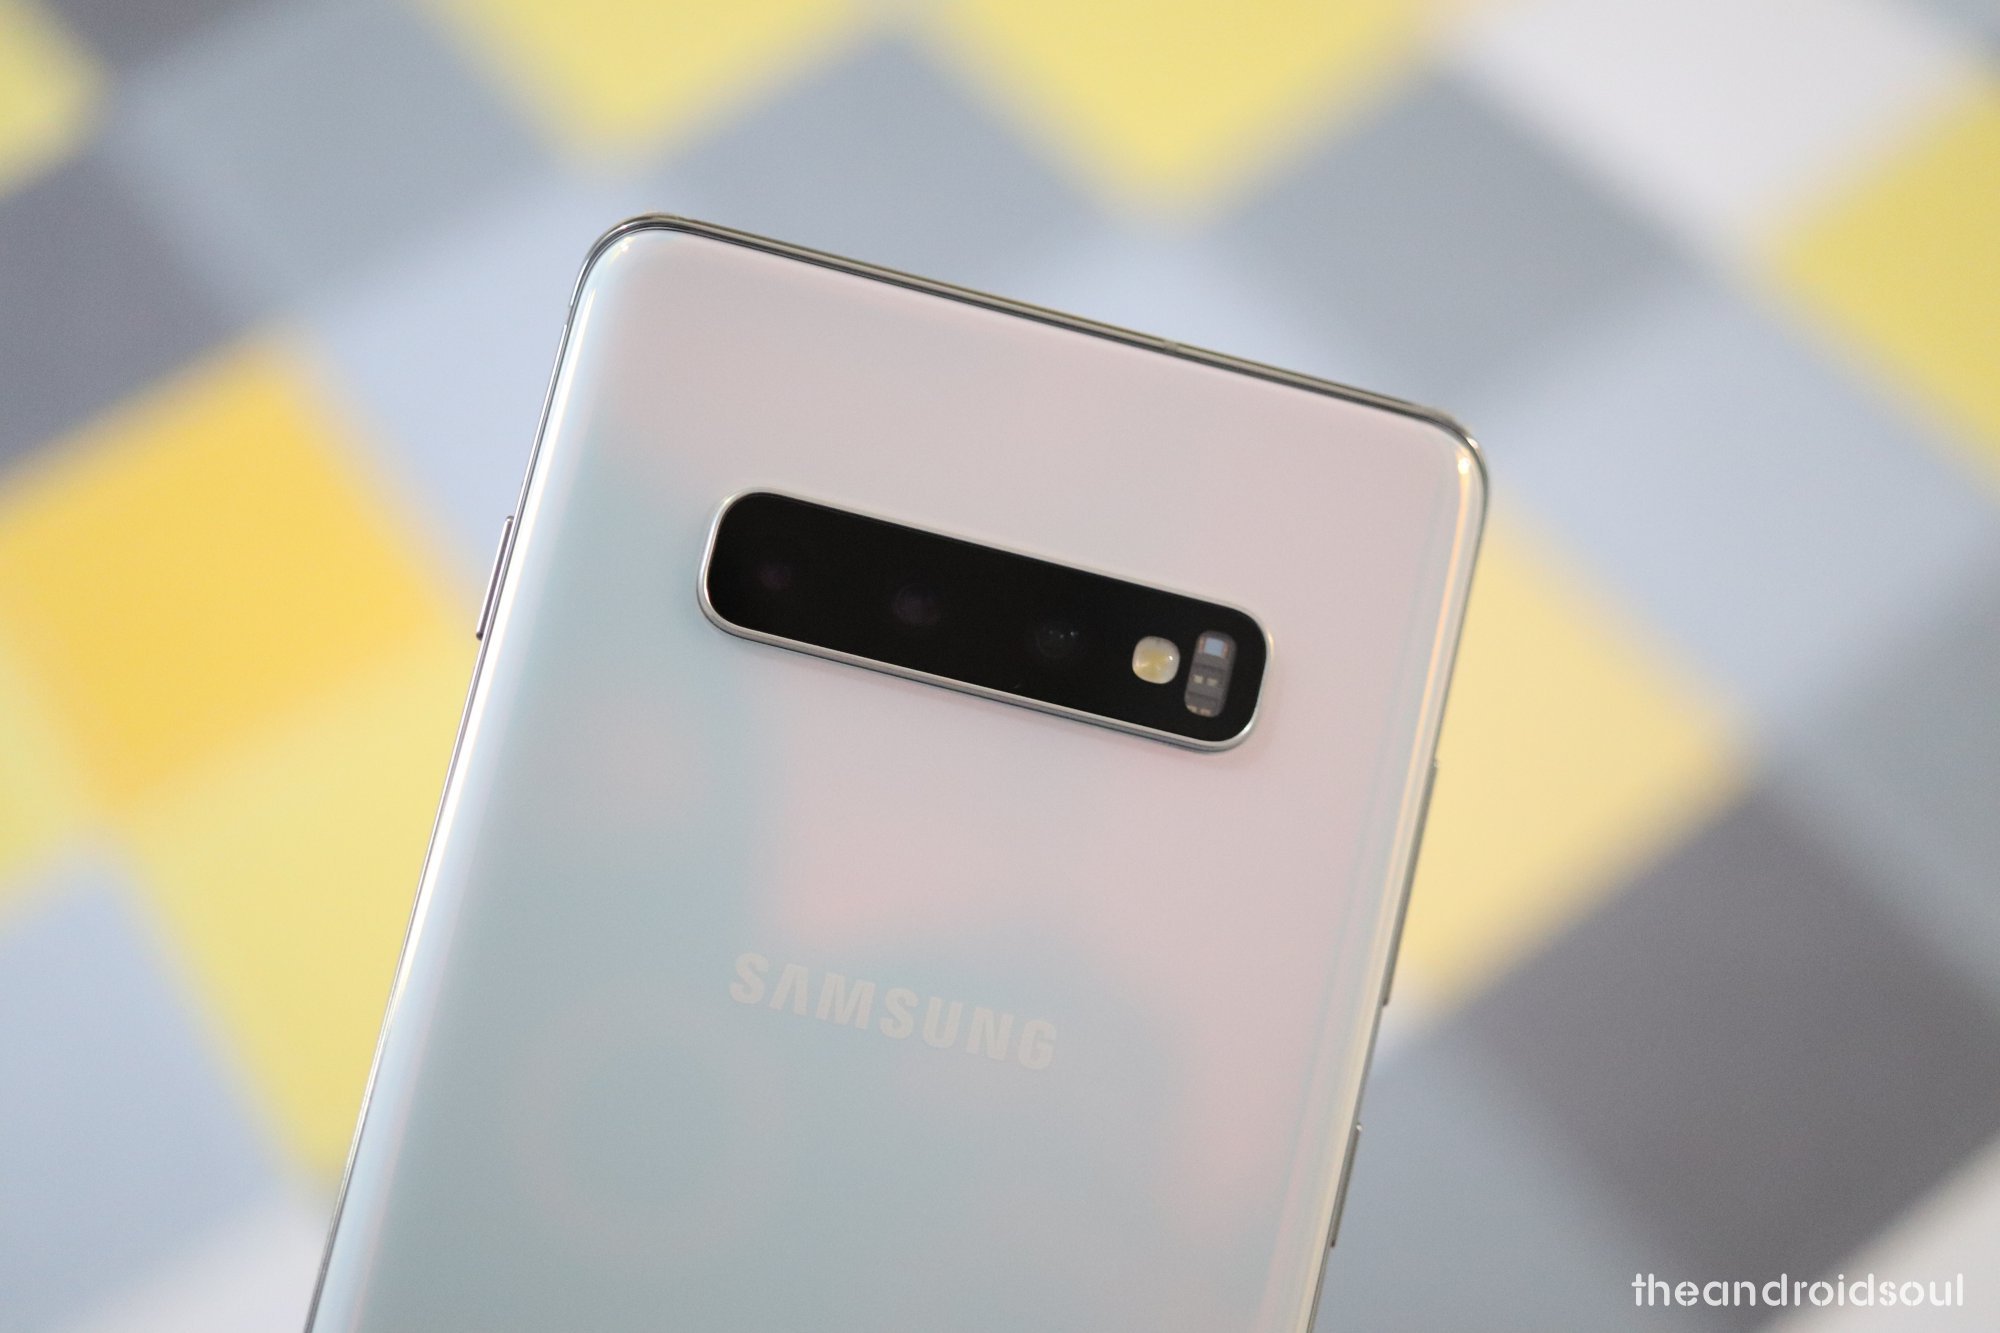 Galaxy S10 Android 10 update